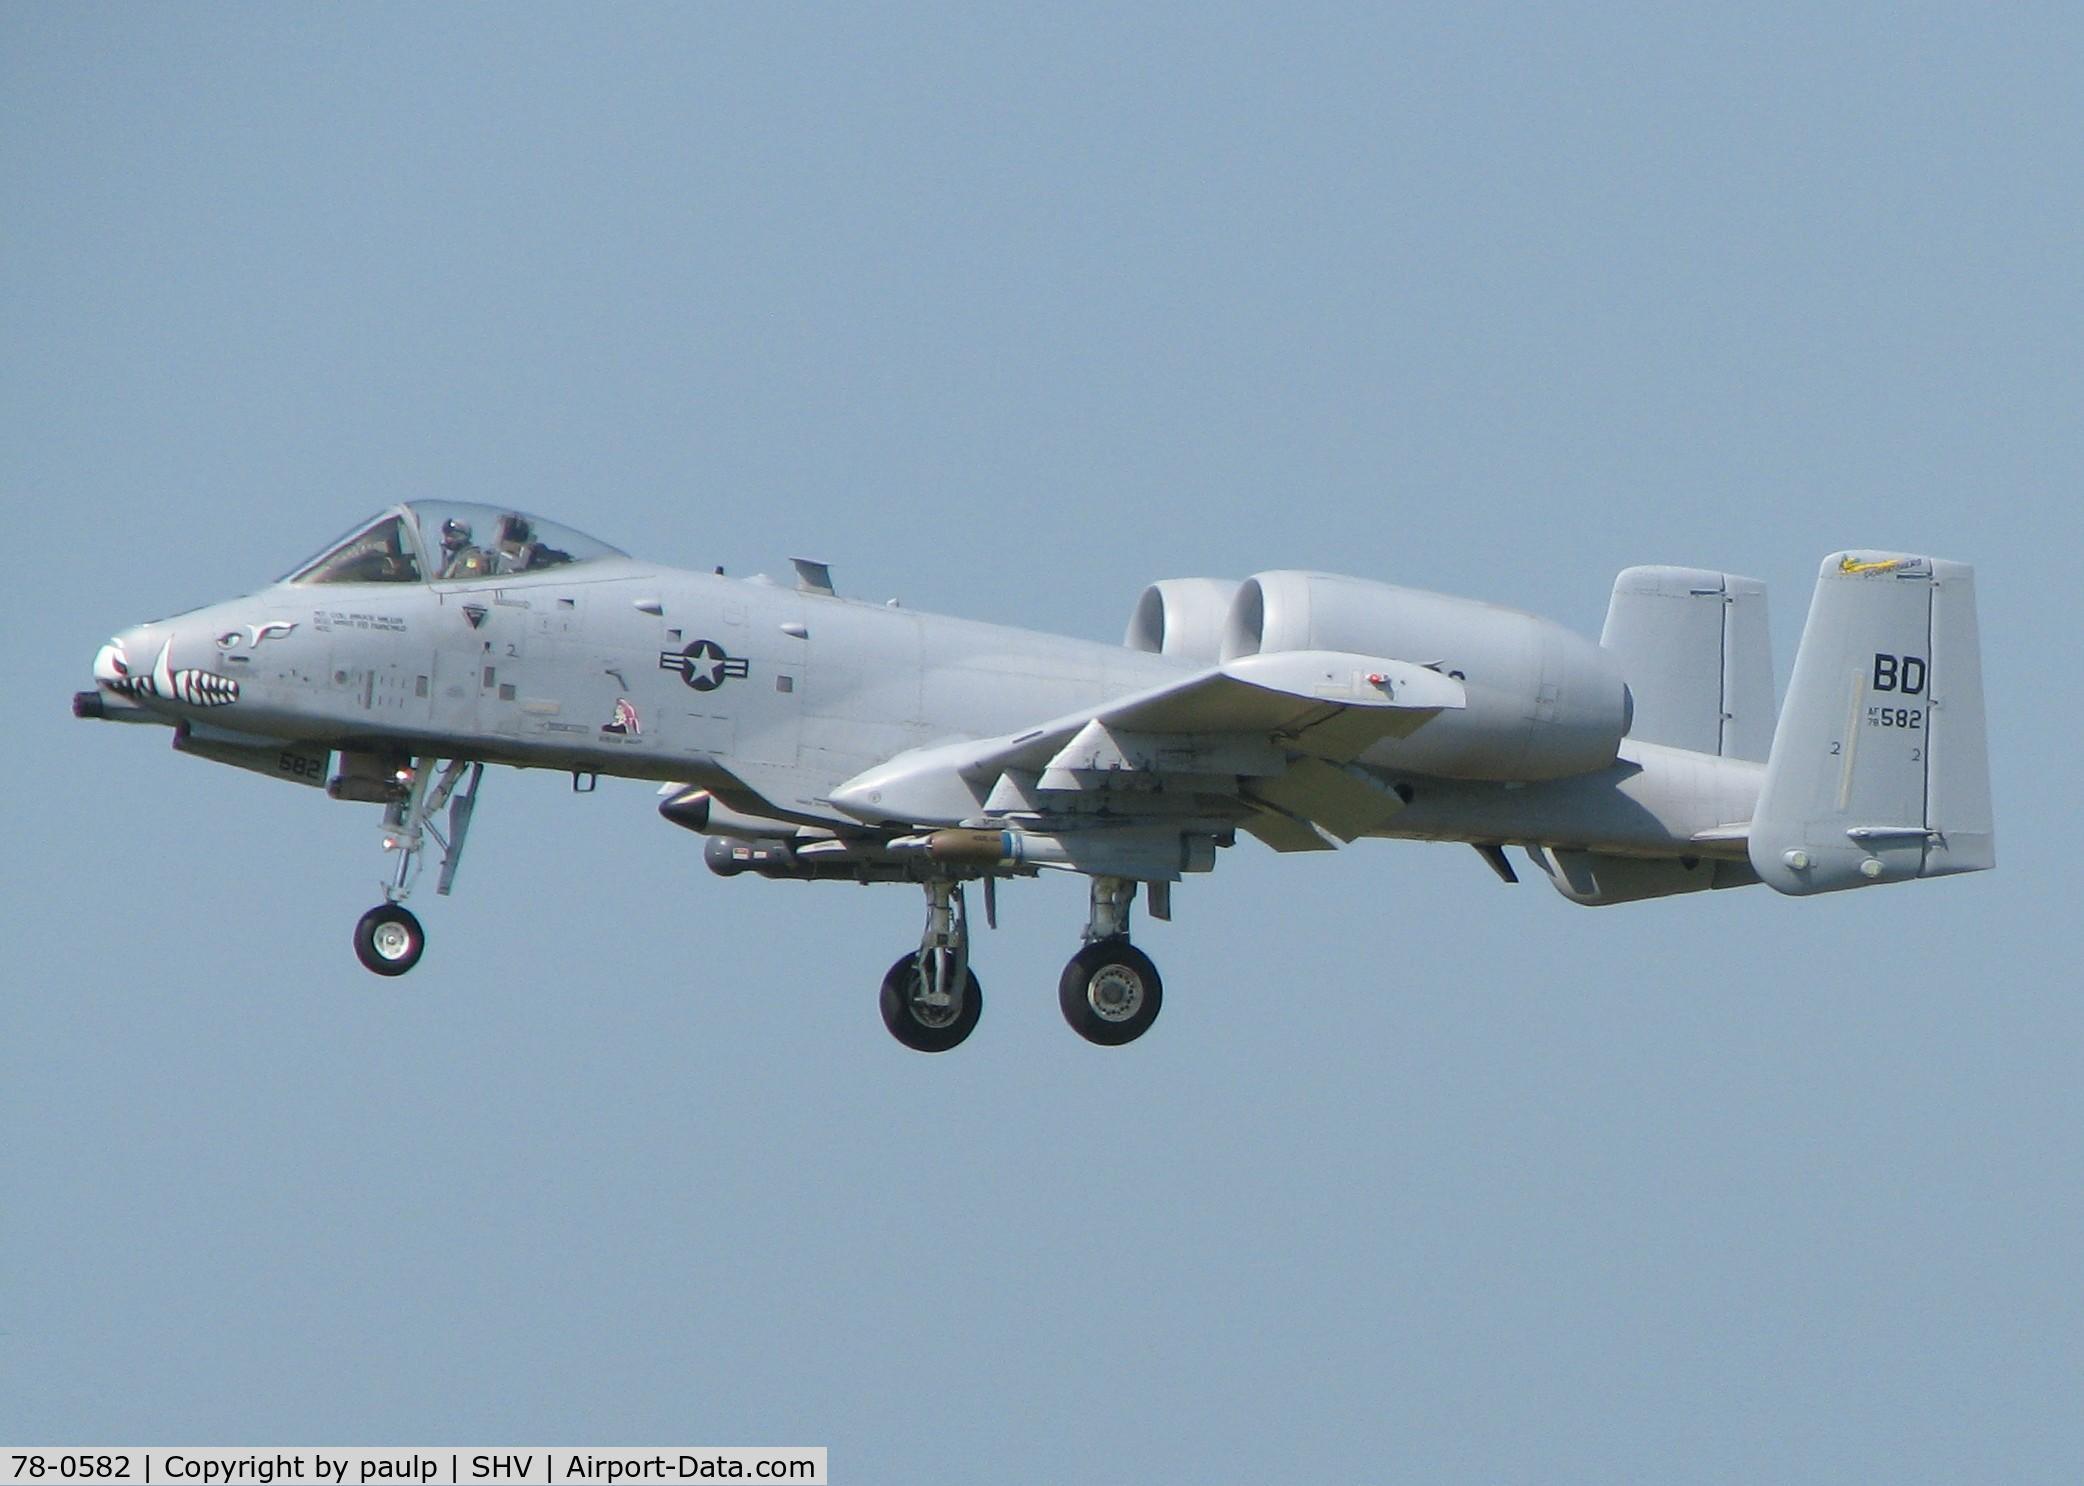 78-0582, 1978 Fairchild Republic A-10C Thunderbolt II C/N A10-0202, Touch and going from runway 14 at Shreveport Regional.